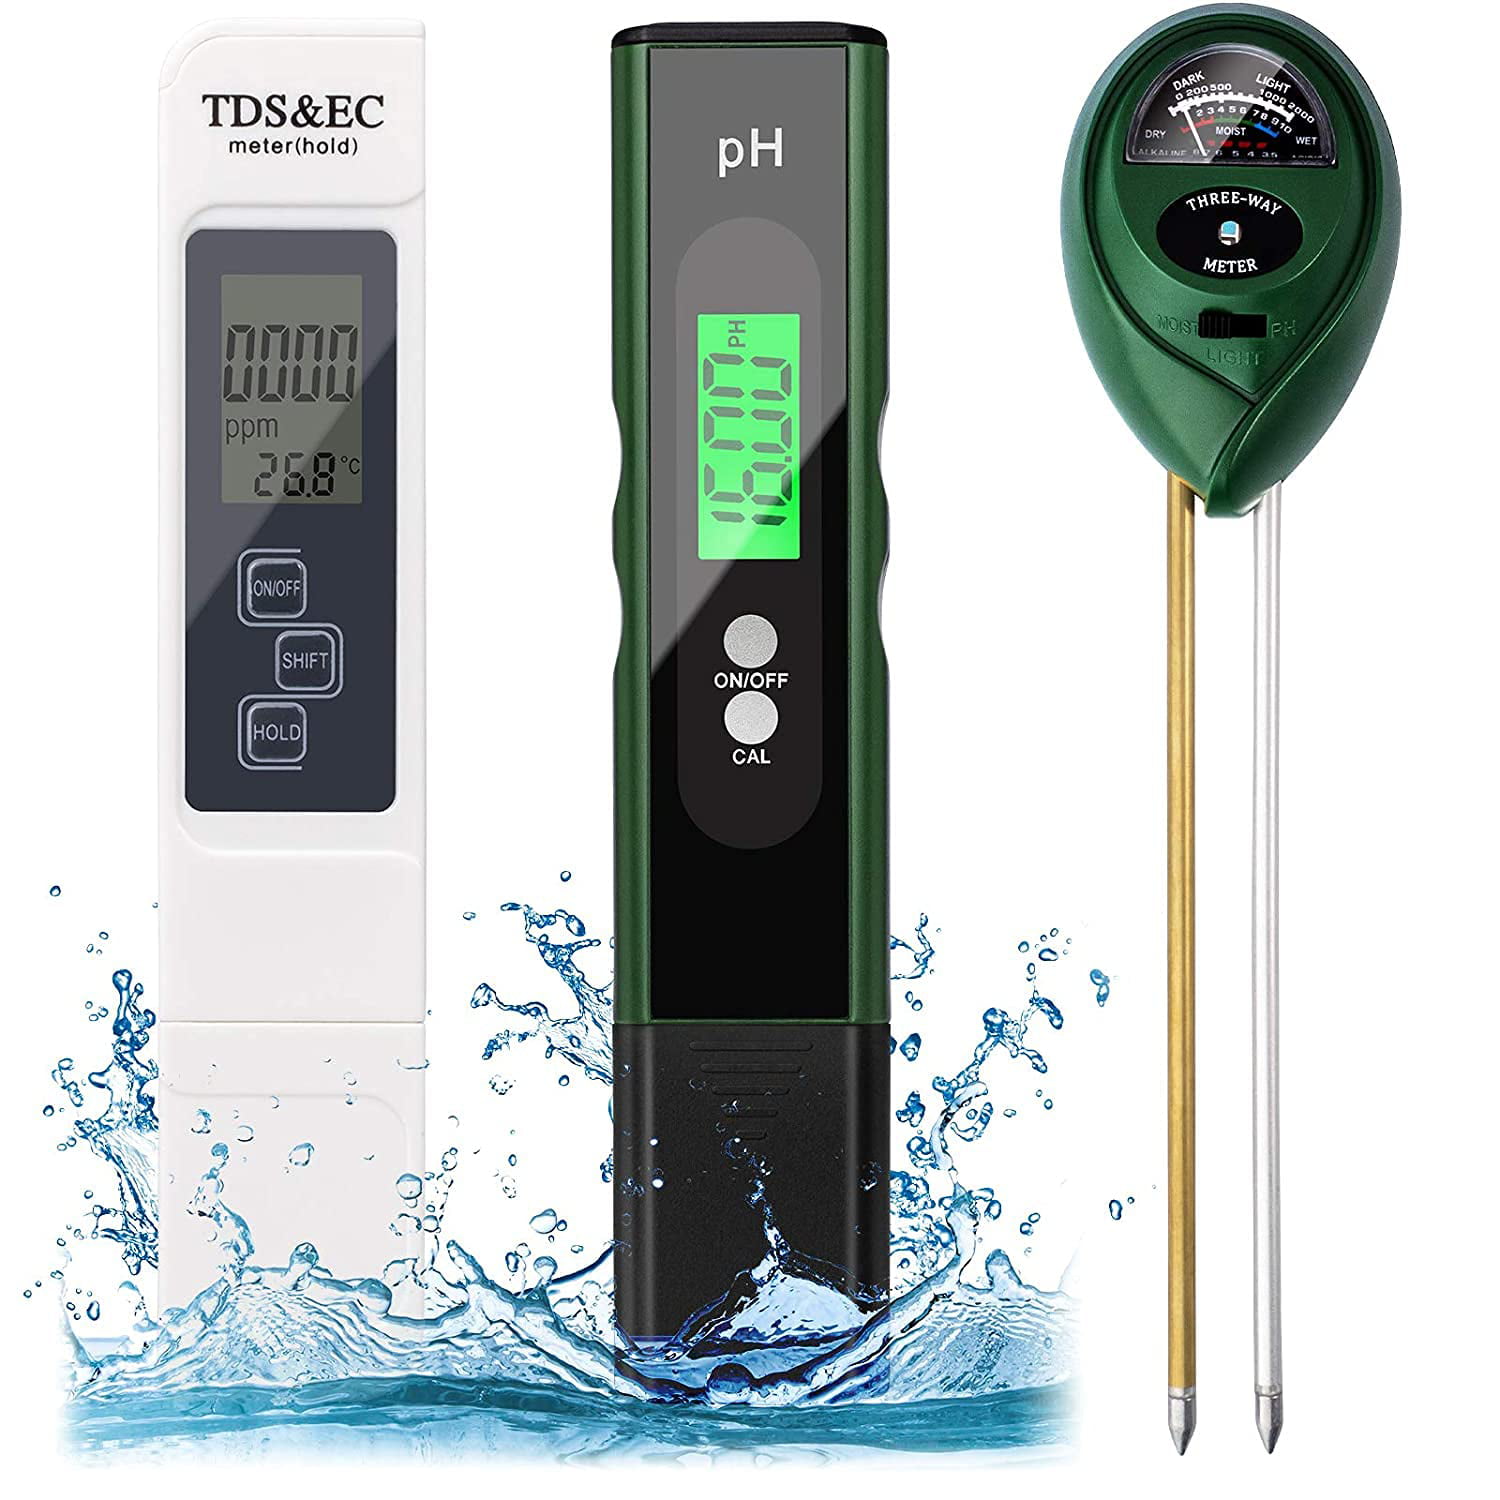 TDS/EC & pH meter set with pH test solution buffers. 